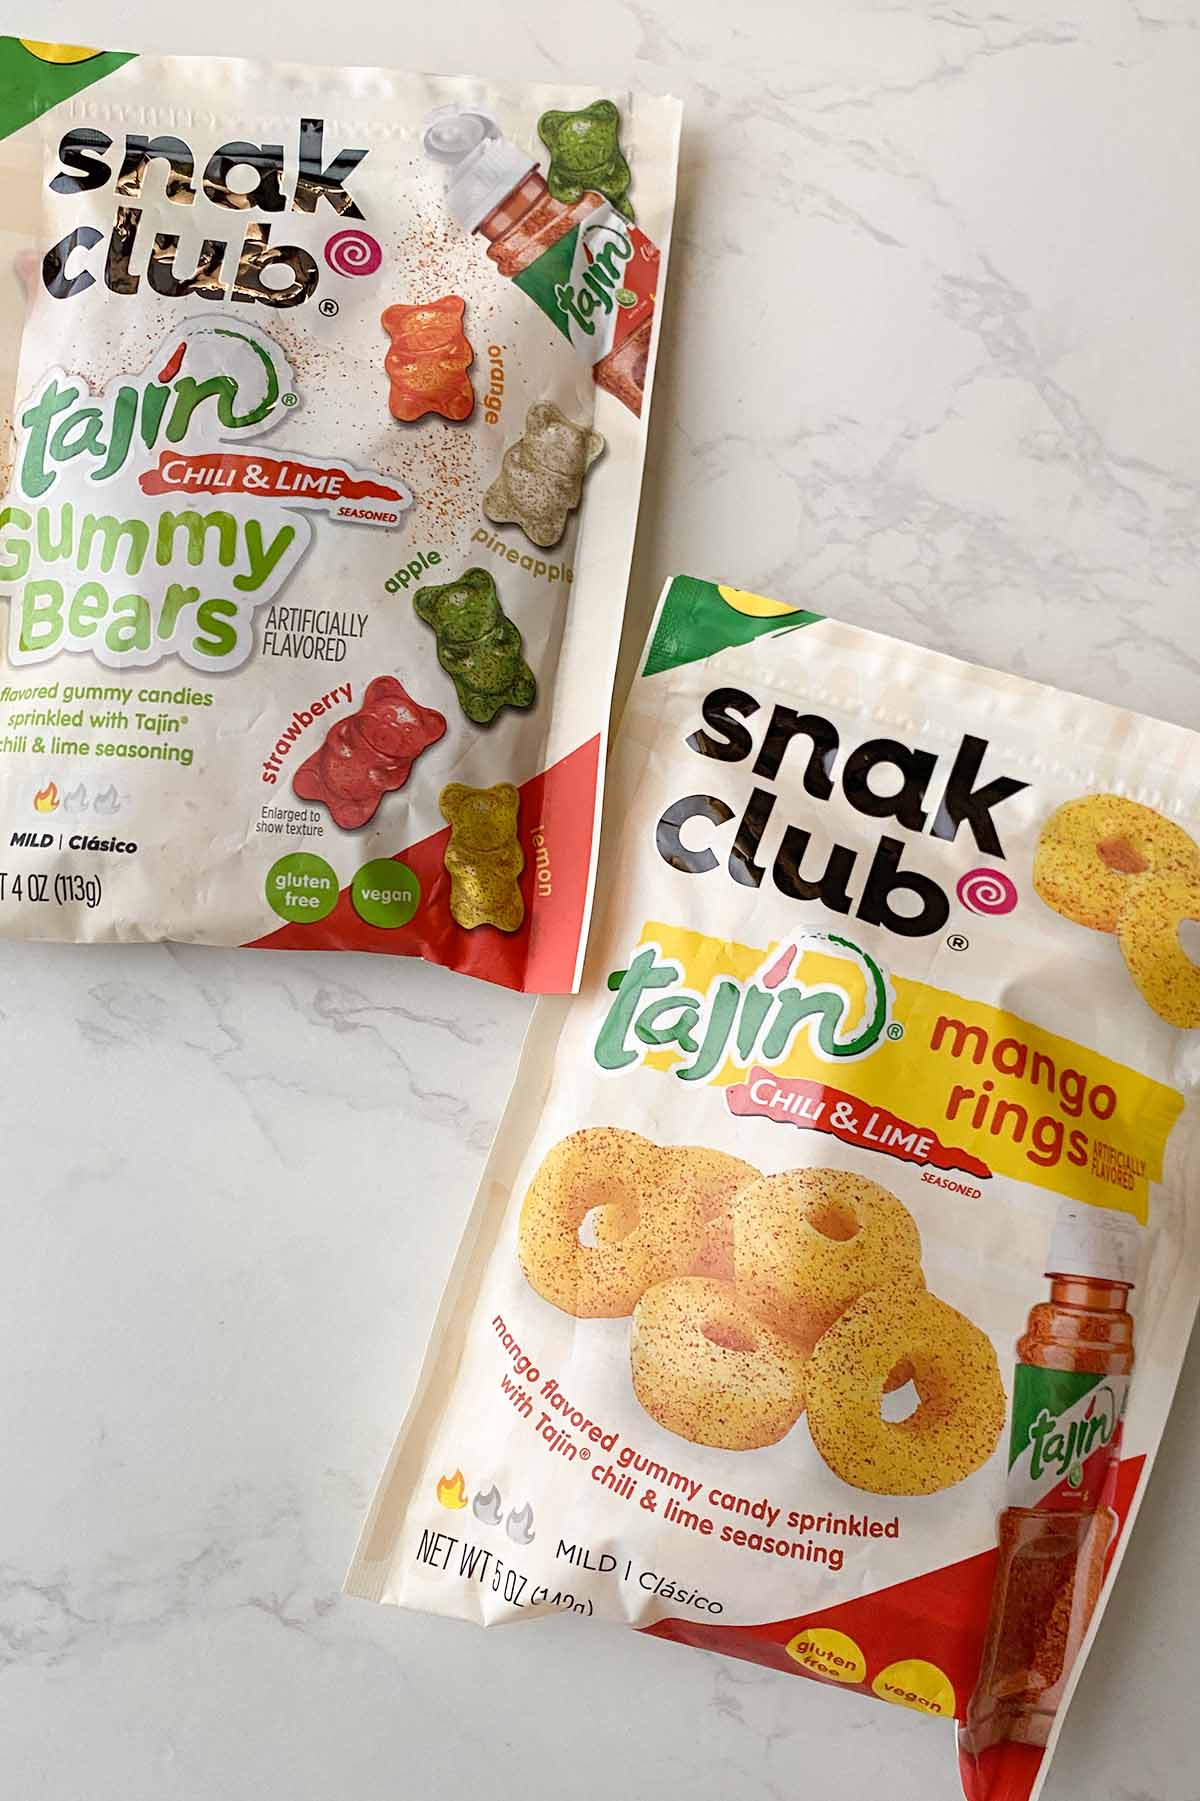 bags of Snak Club vegan gummy bears and mango rings on a white table